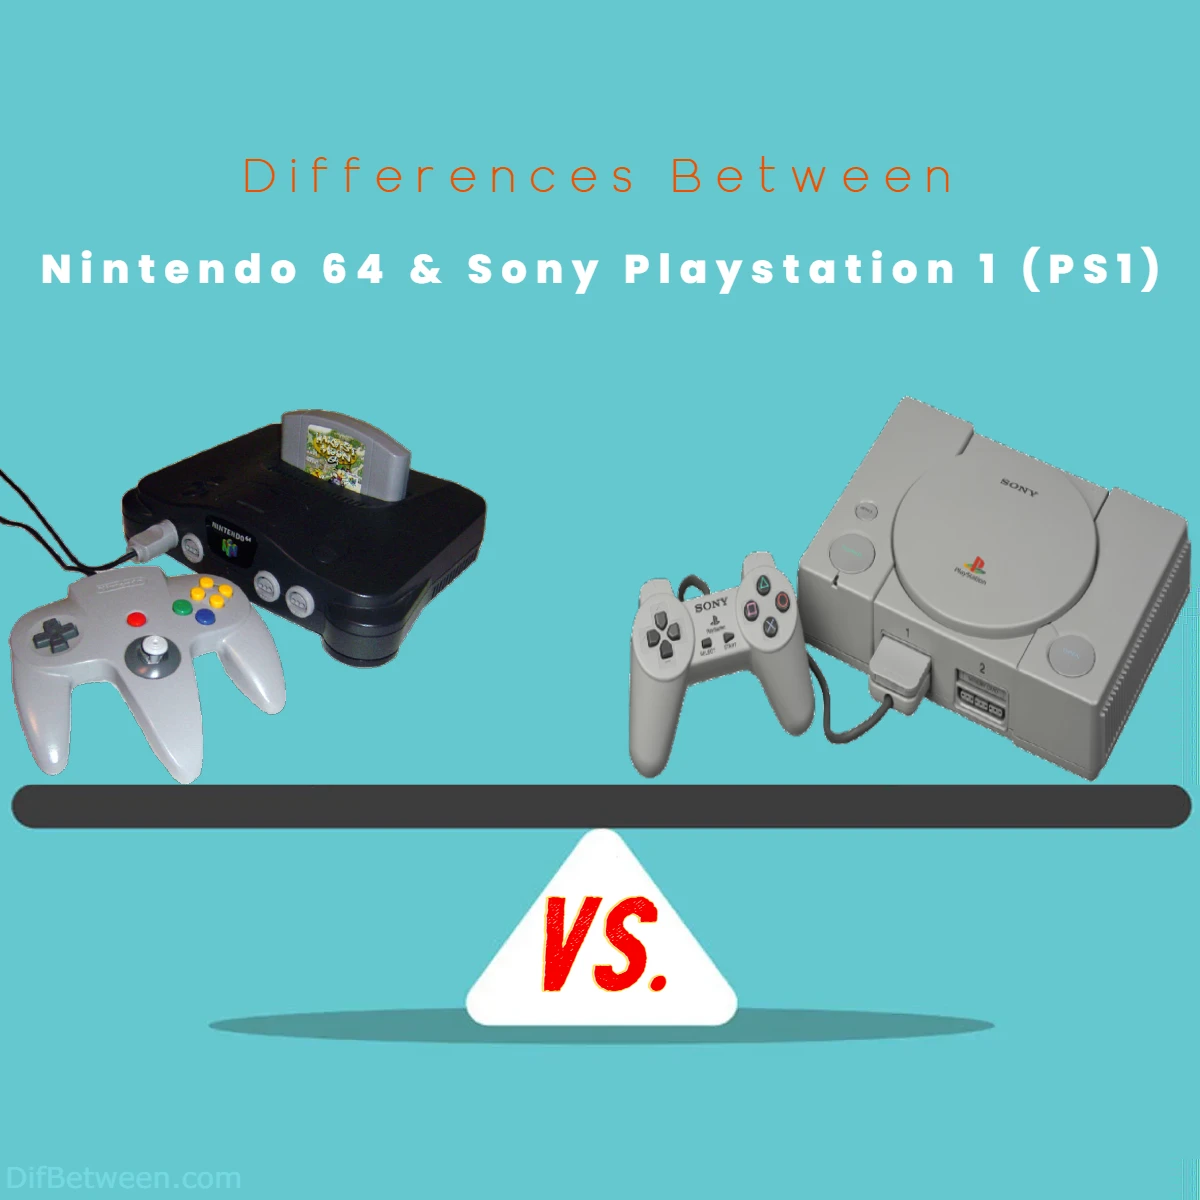 Differences Between Nintendo 64 vs Sony Playstation 1 (PS1)